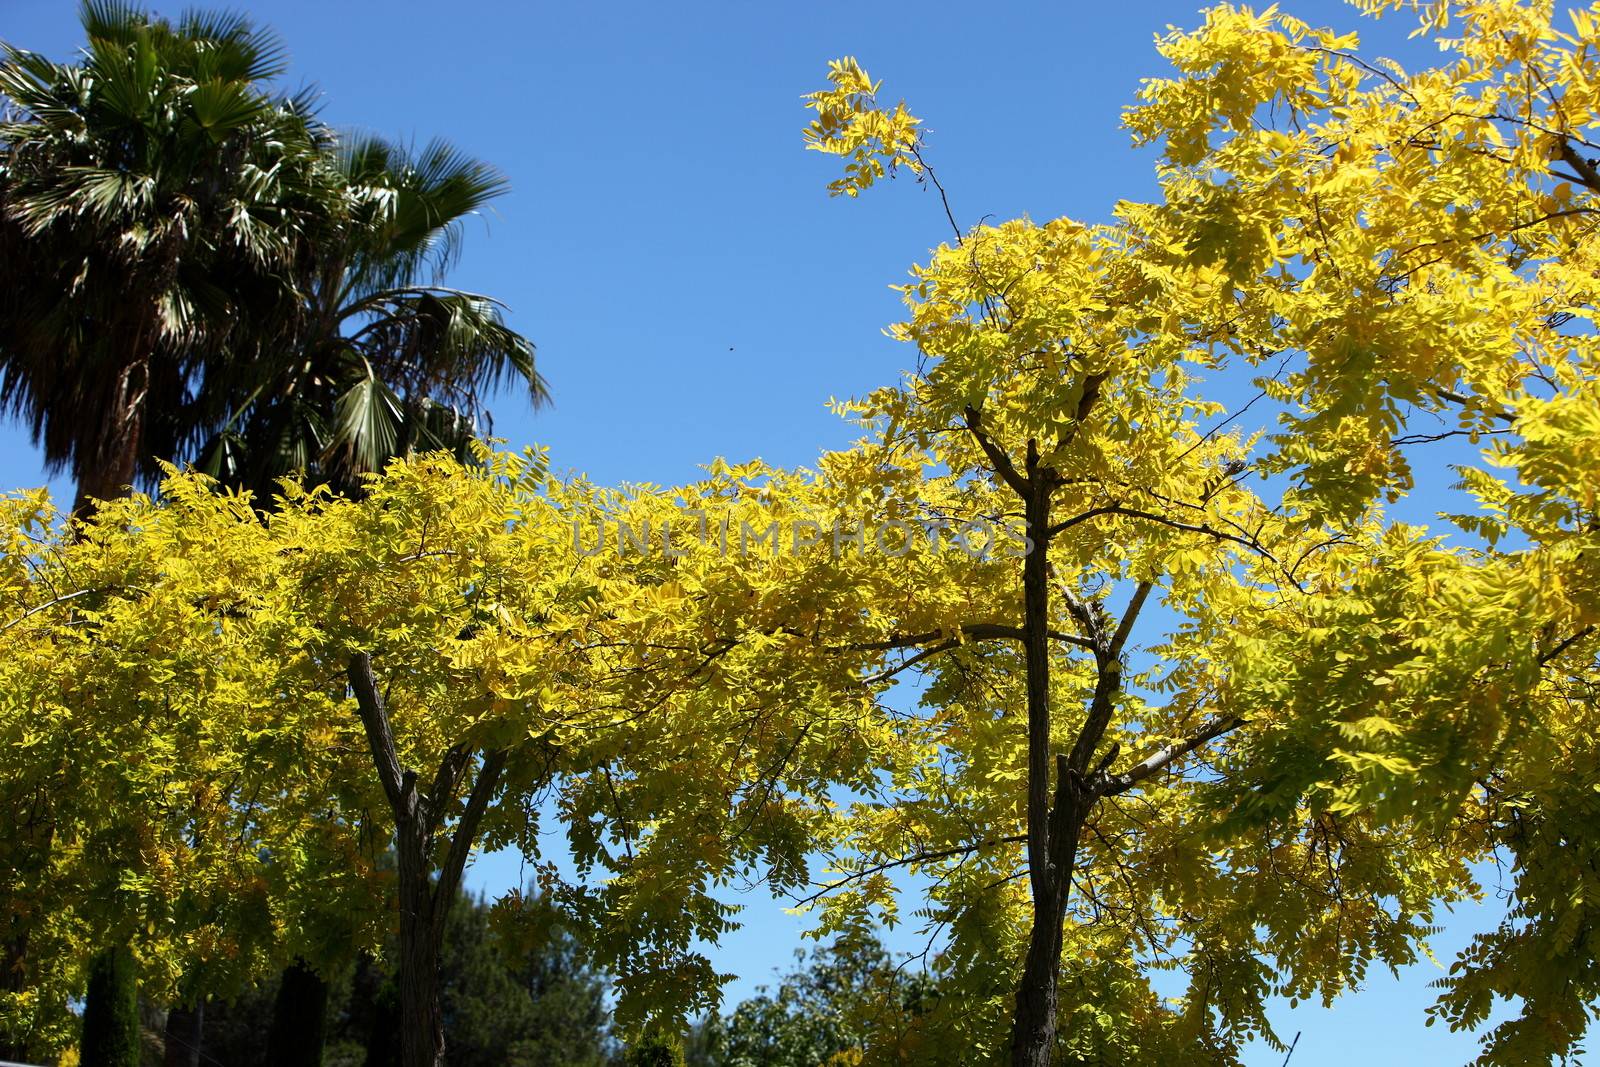 Spectacular yellow flowers and foliage on trees by Farina6000